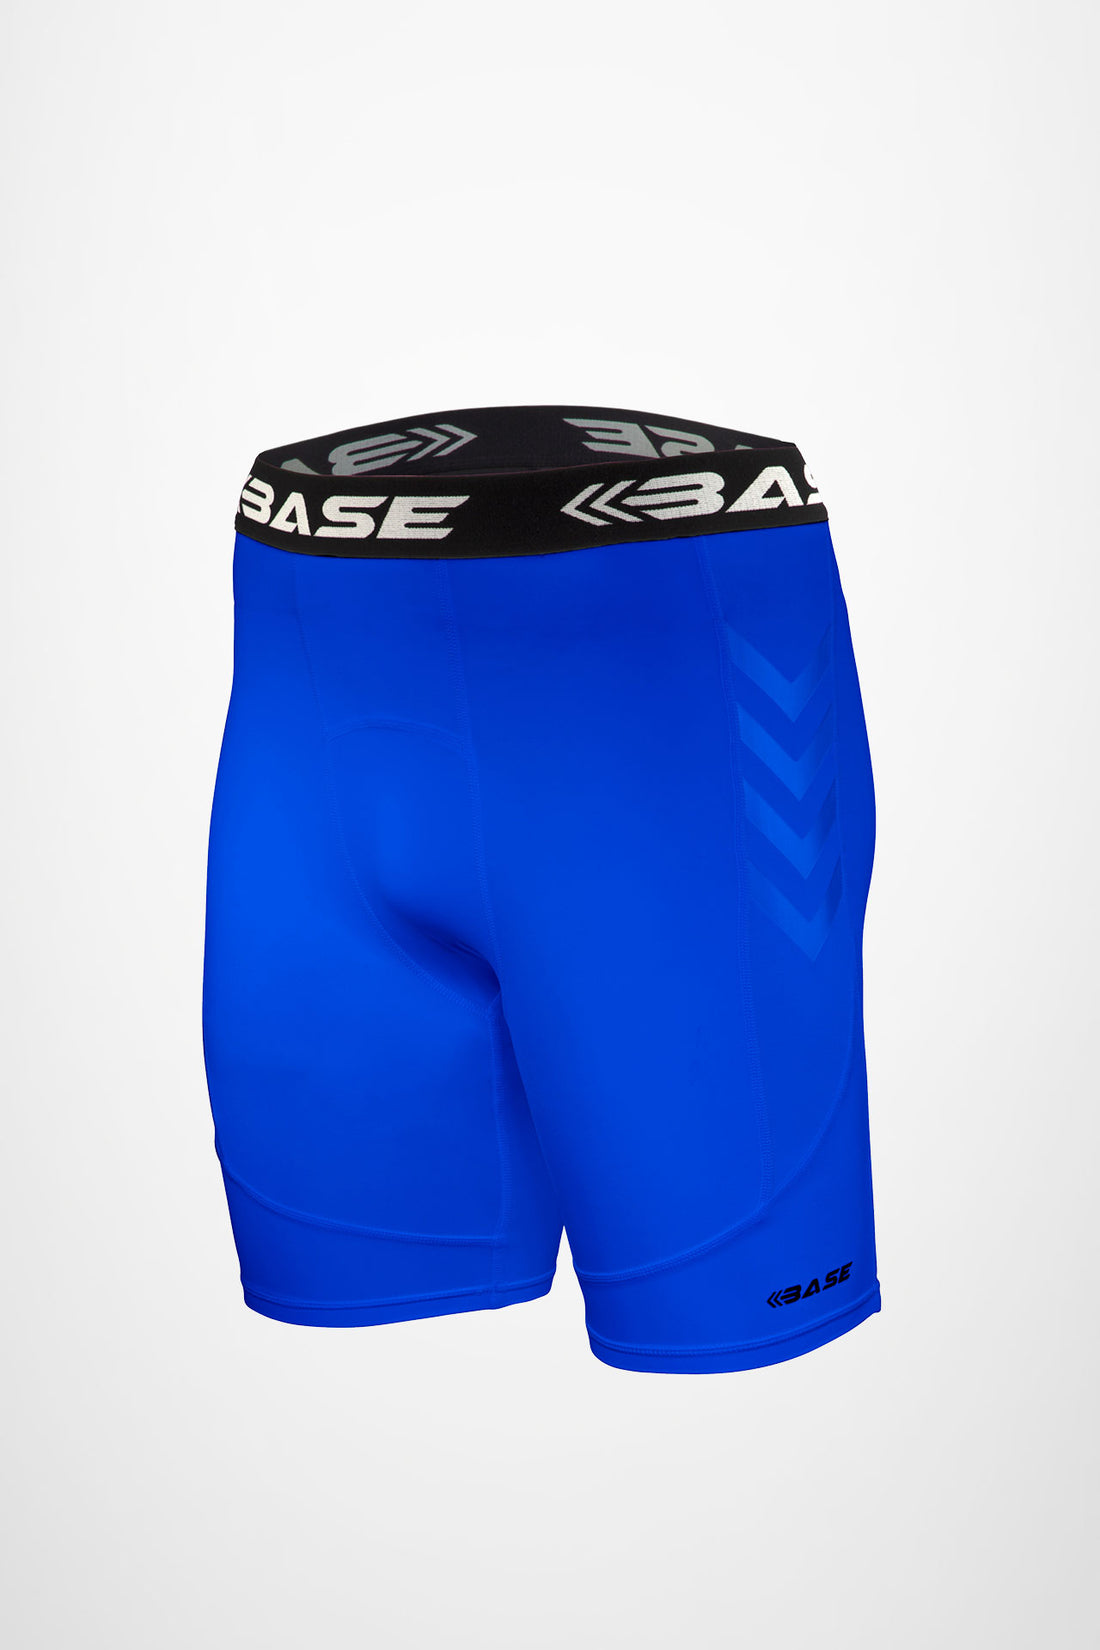 BASE Youth Compression Shorts - 2 for $60